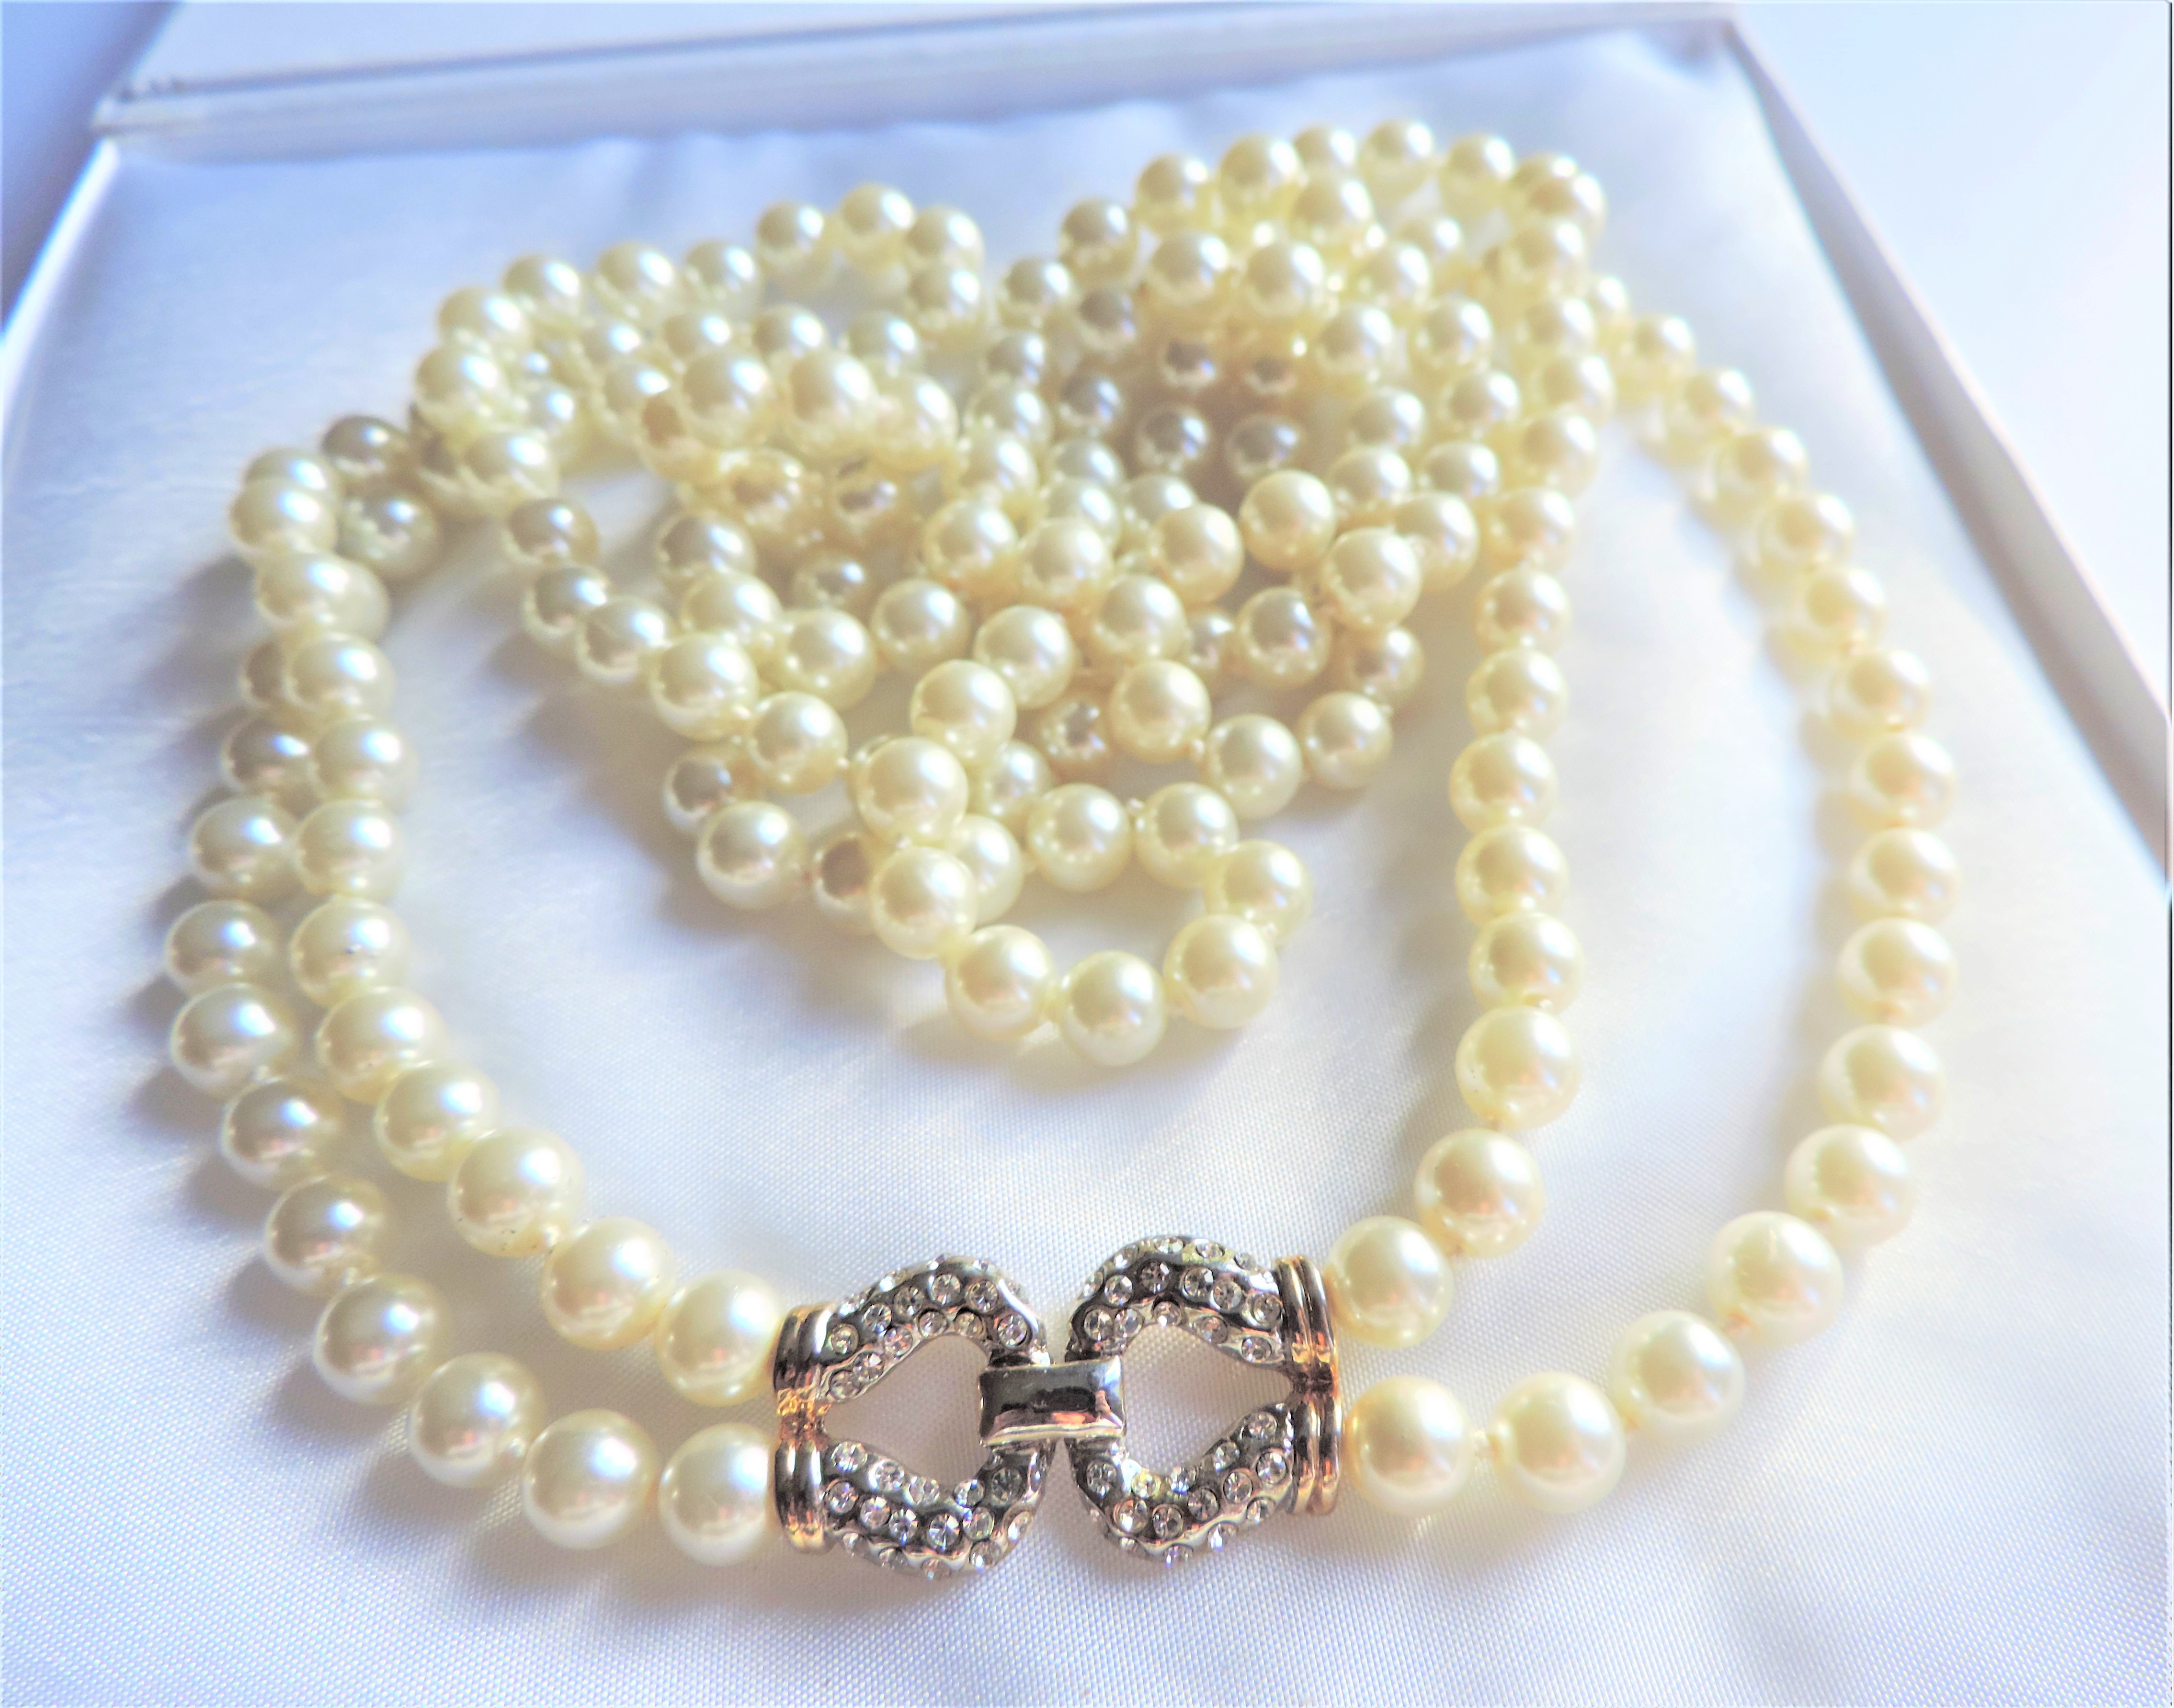 Double Strand Pearl Necklace Pearls 26"""" Long New with Gift Box - Image 2 of 4